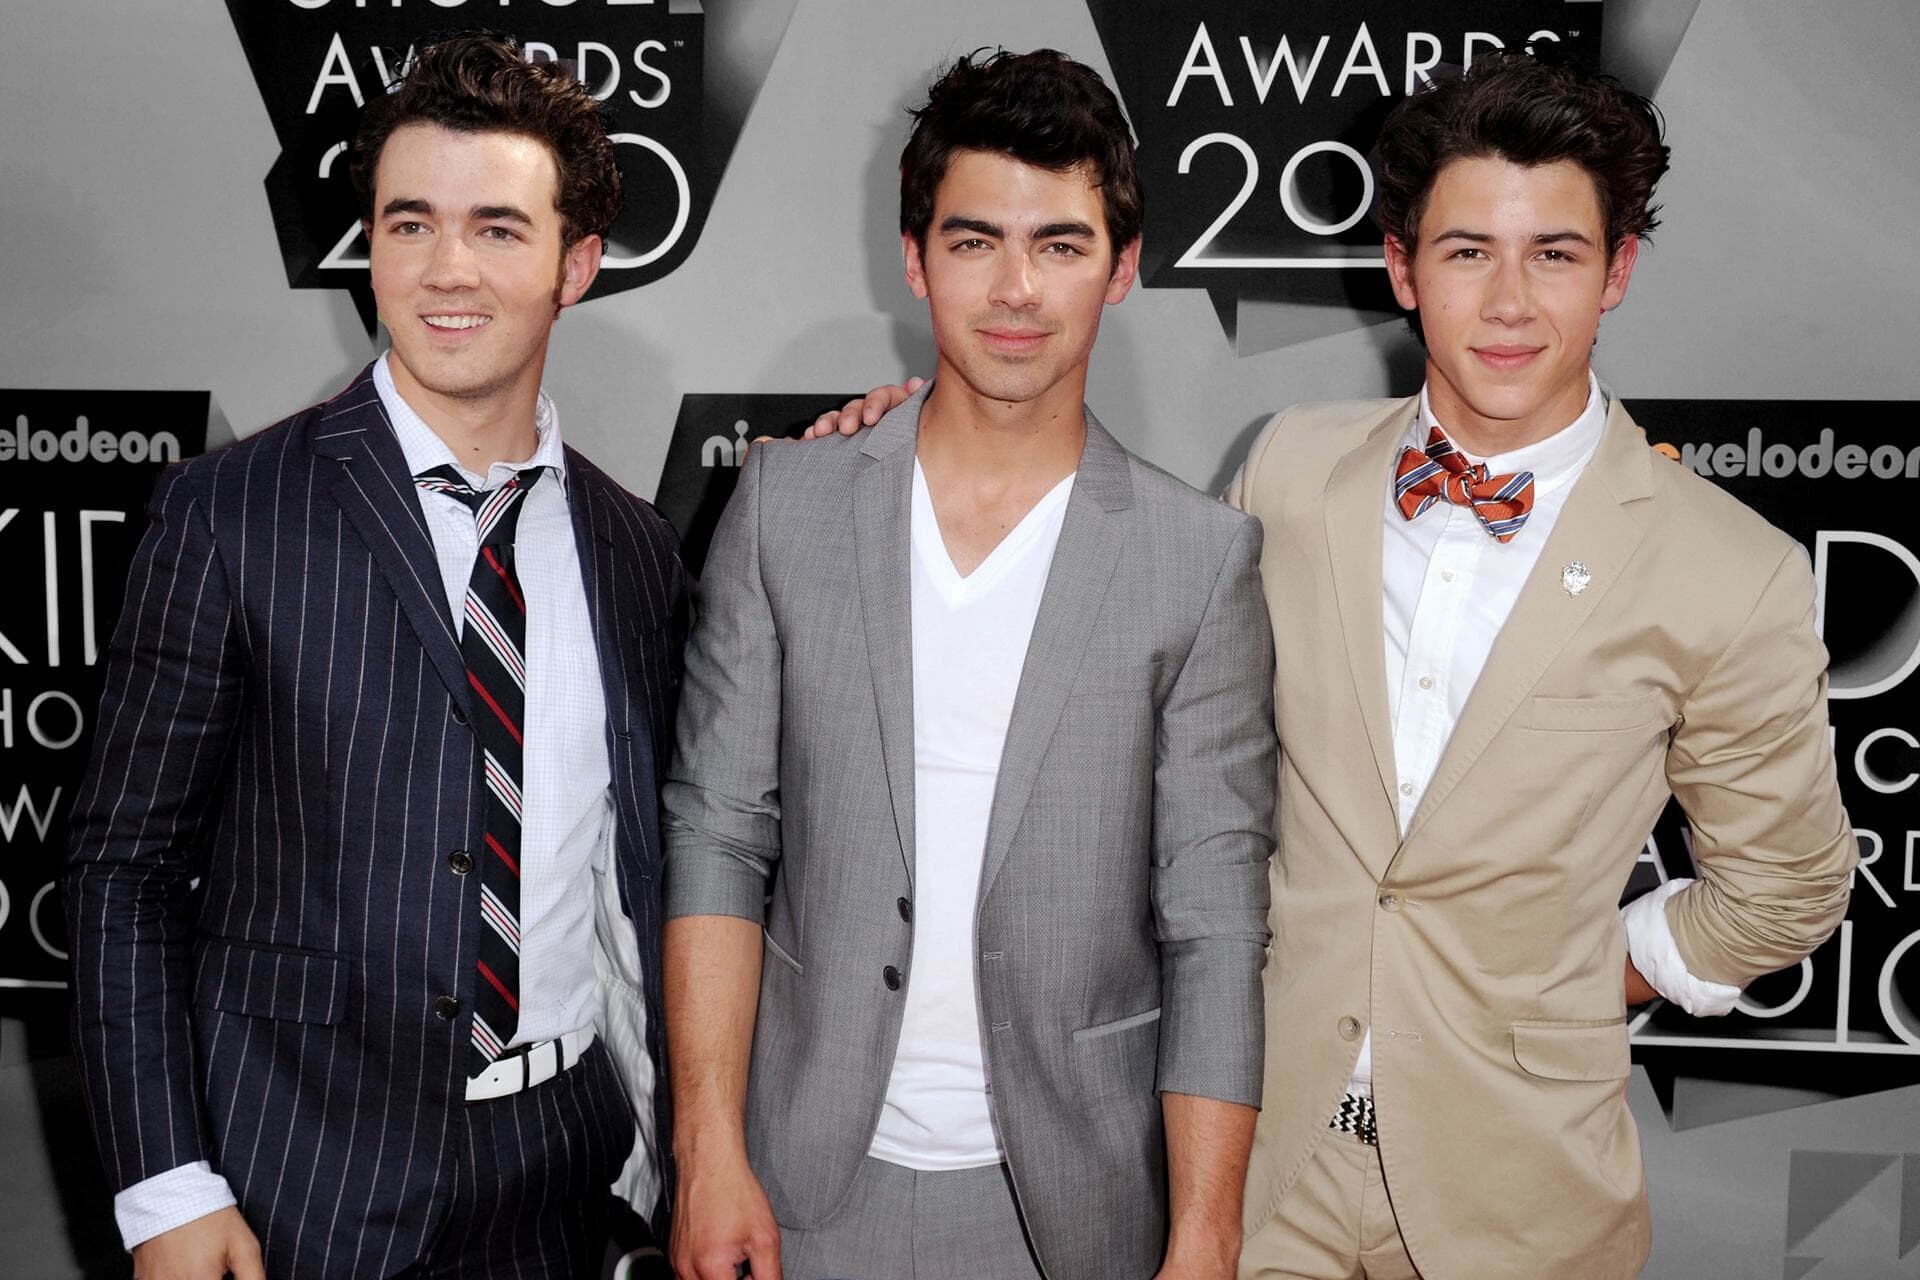 Jonas Brothers: They stared in the 2010 movie Camp Rock 2: The Final Jam. 1920x1280 HD Wallpaper.